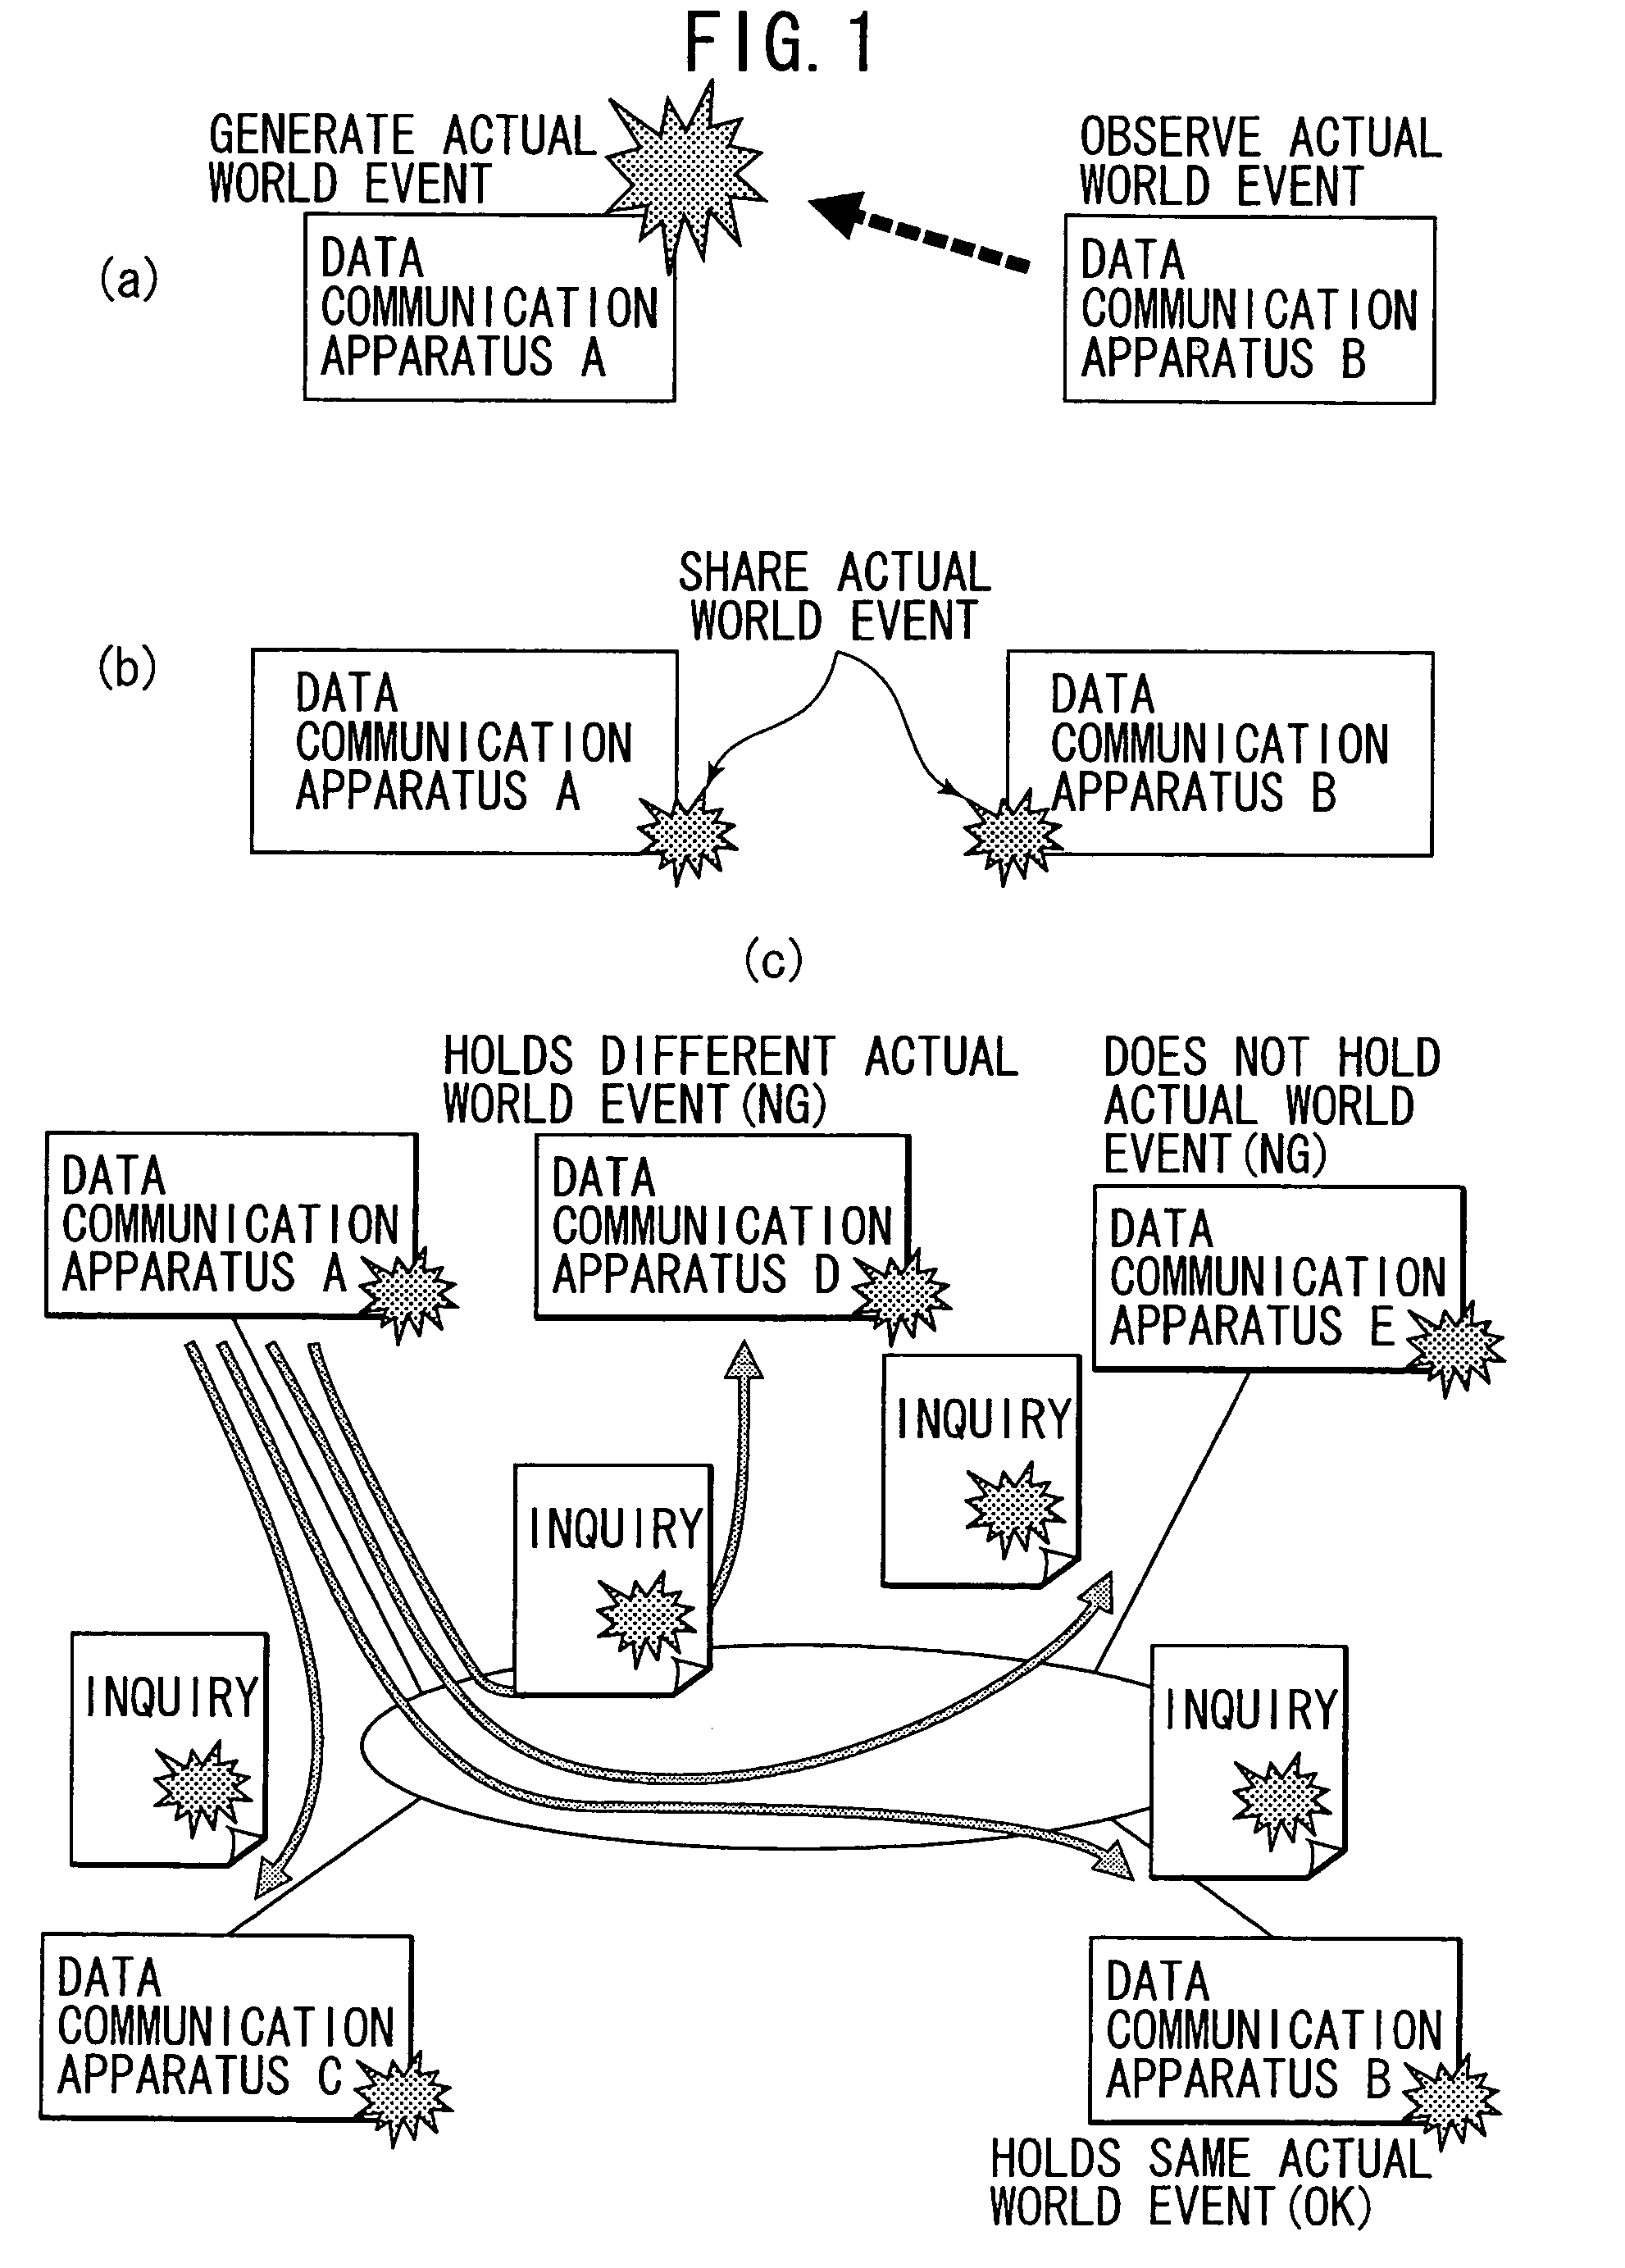 Data communication system, data communication apparatus, and data communication method for generating or detecting an event